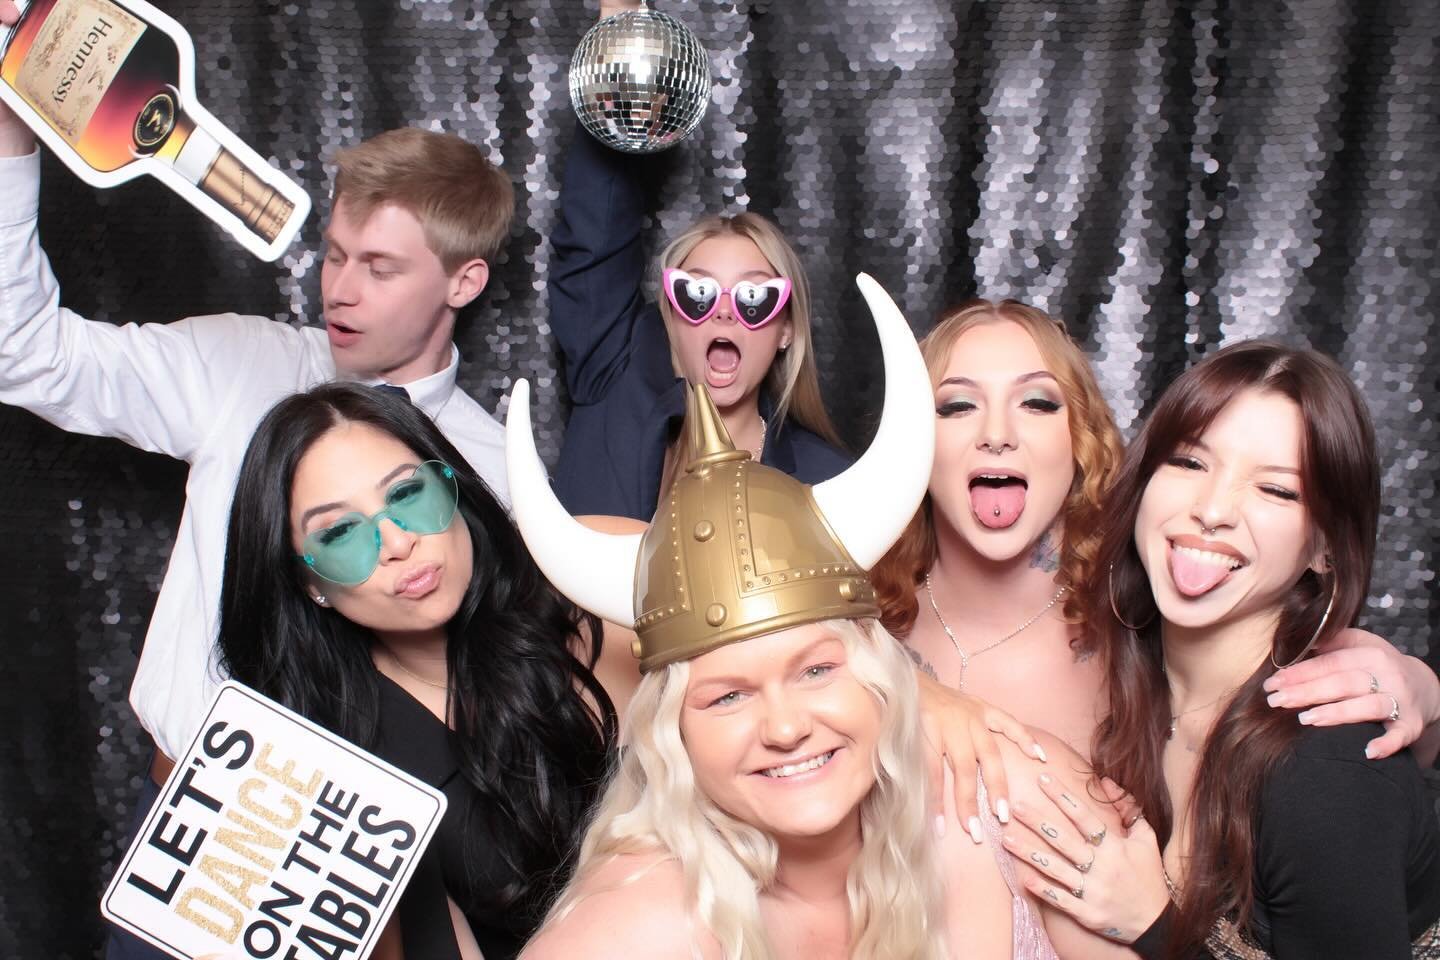 We had a great time at Coast to Coast&rsquo;s Awards Banquet this past weekend! Ready to add a Photo Booth for your next event? Make it happen and fill out our online booking form ☺️ (Website is in our bio)✨
.
.
.
.
.
.
.
.
#photobooth #photoboothren